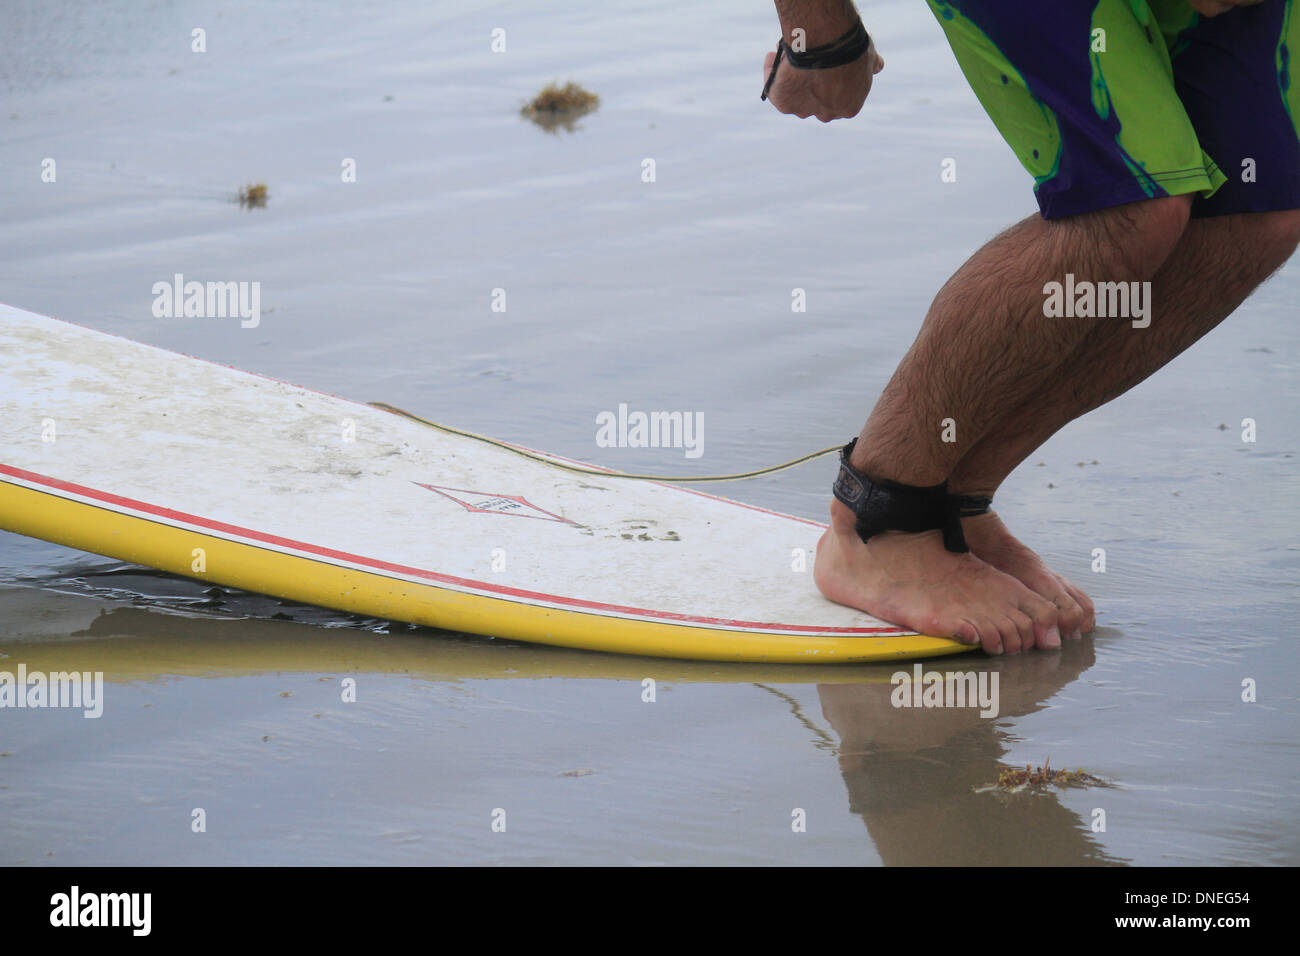 Standing on Surf board, Cocoa Beach, Florida Stock Photo